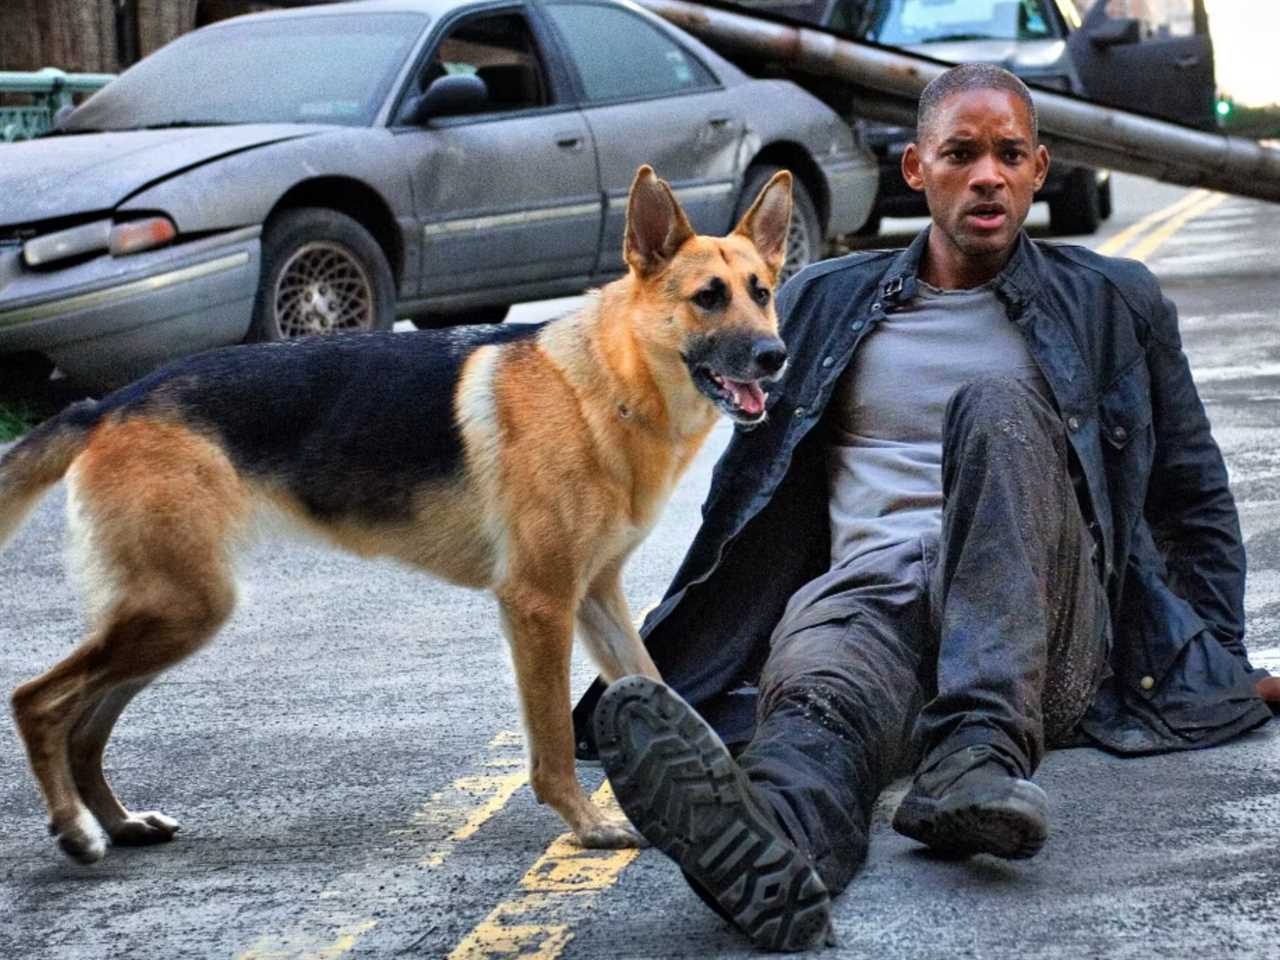 Sam  and Robert Neville (Will Smith) in "I Am Legend."